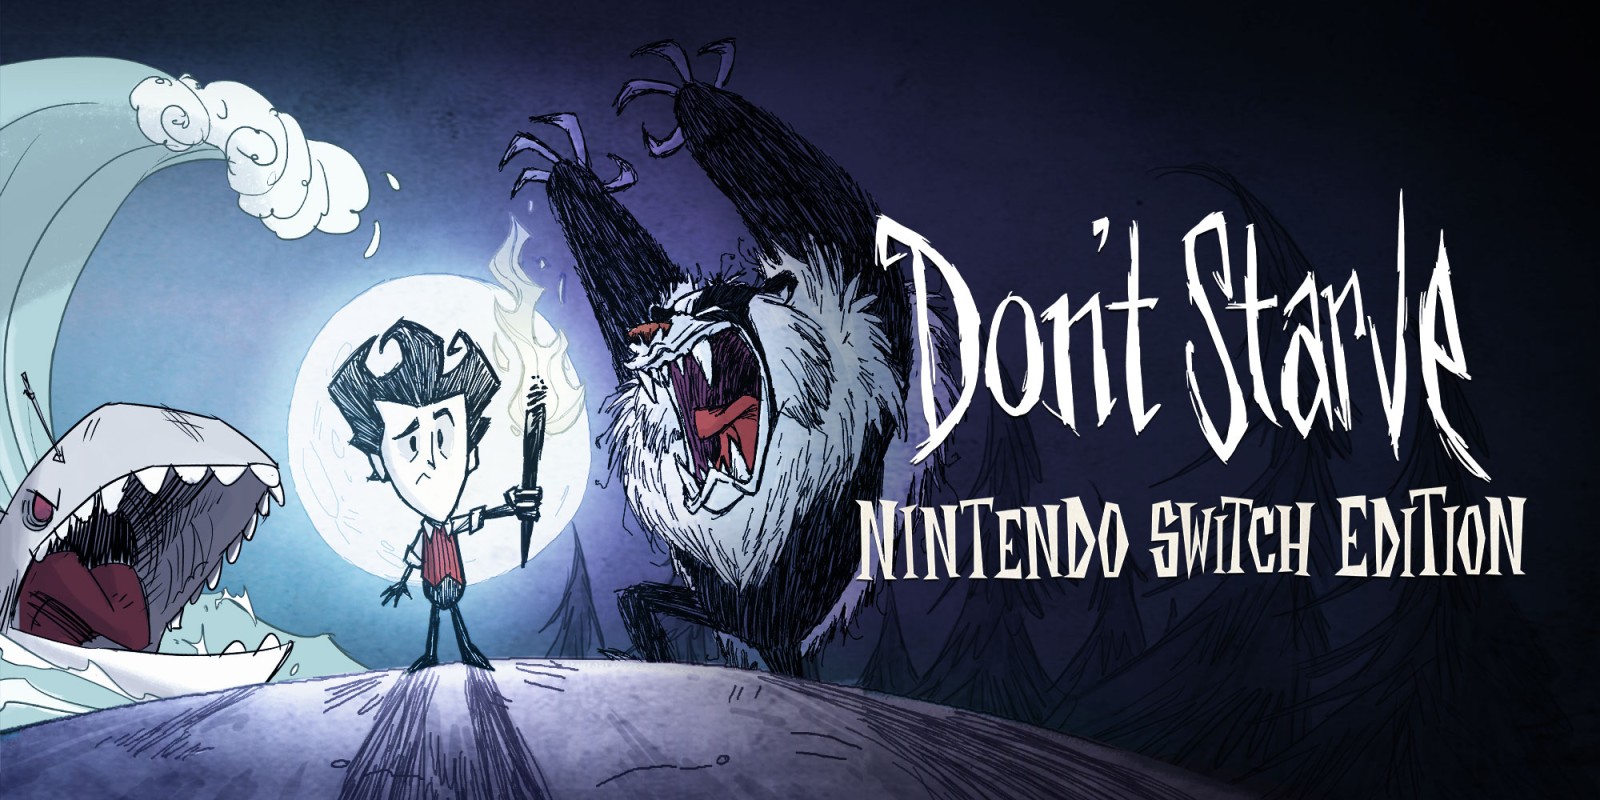 Don’t Starve: Nintendo Switch Edition